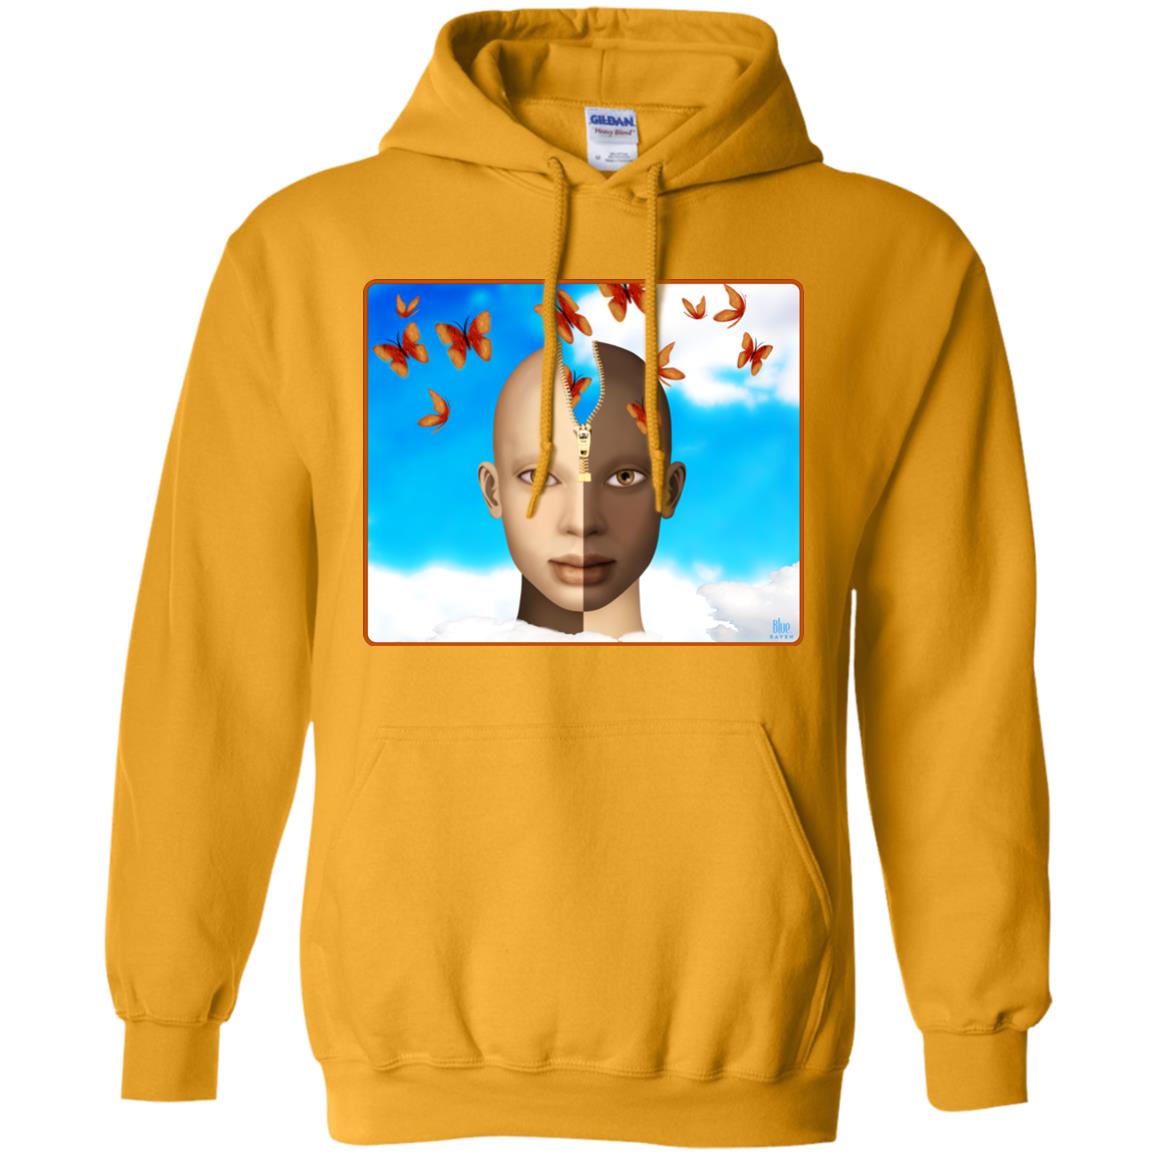 color of our thoughts - Adult Hoodie